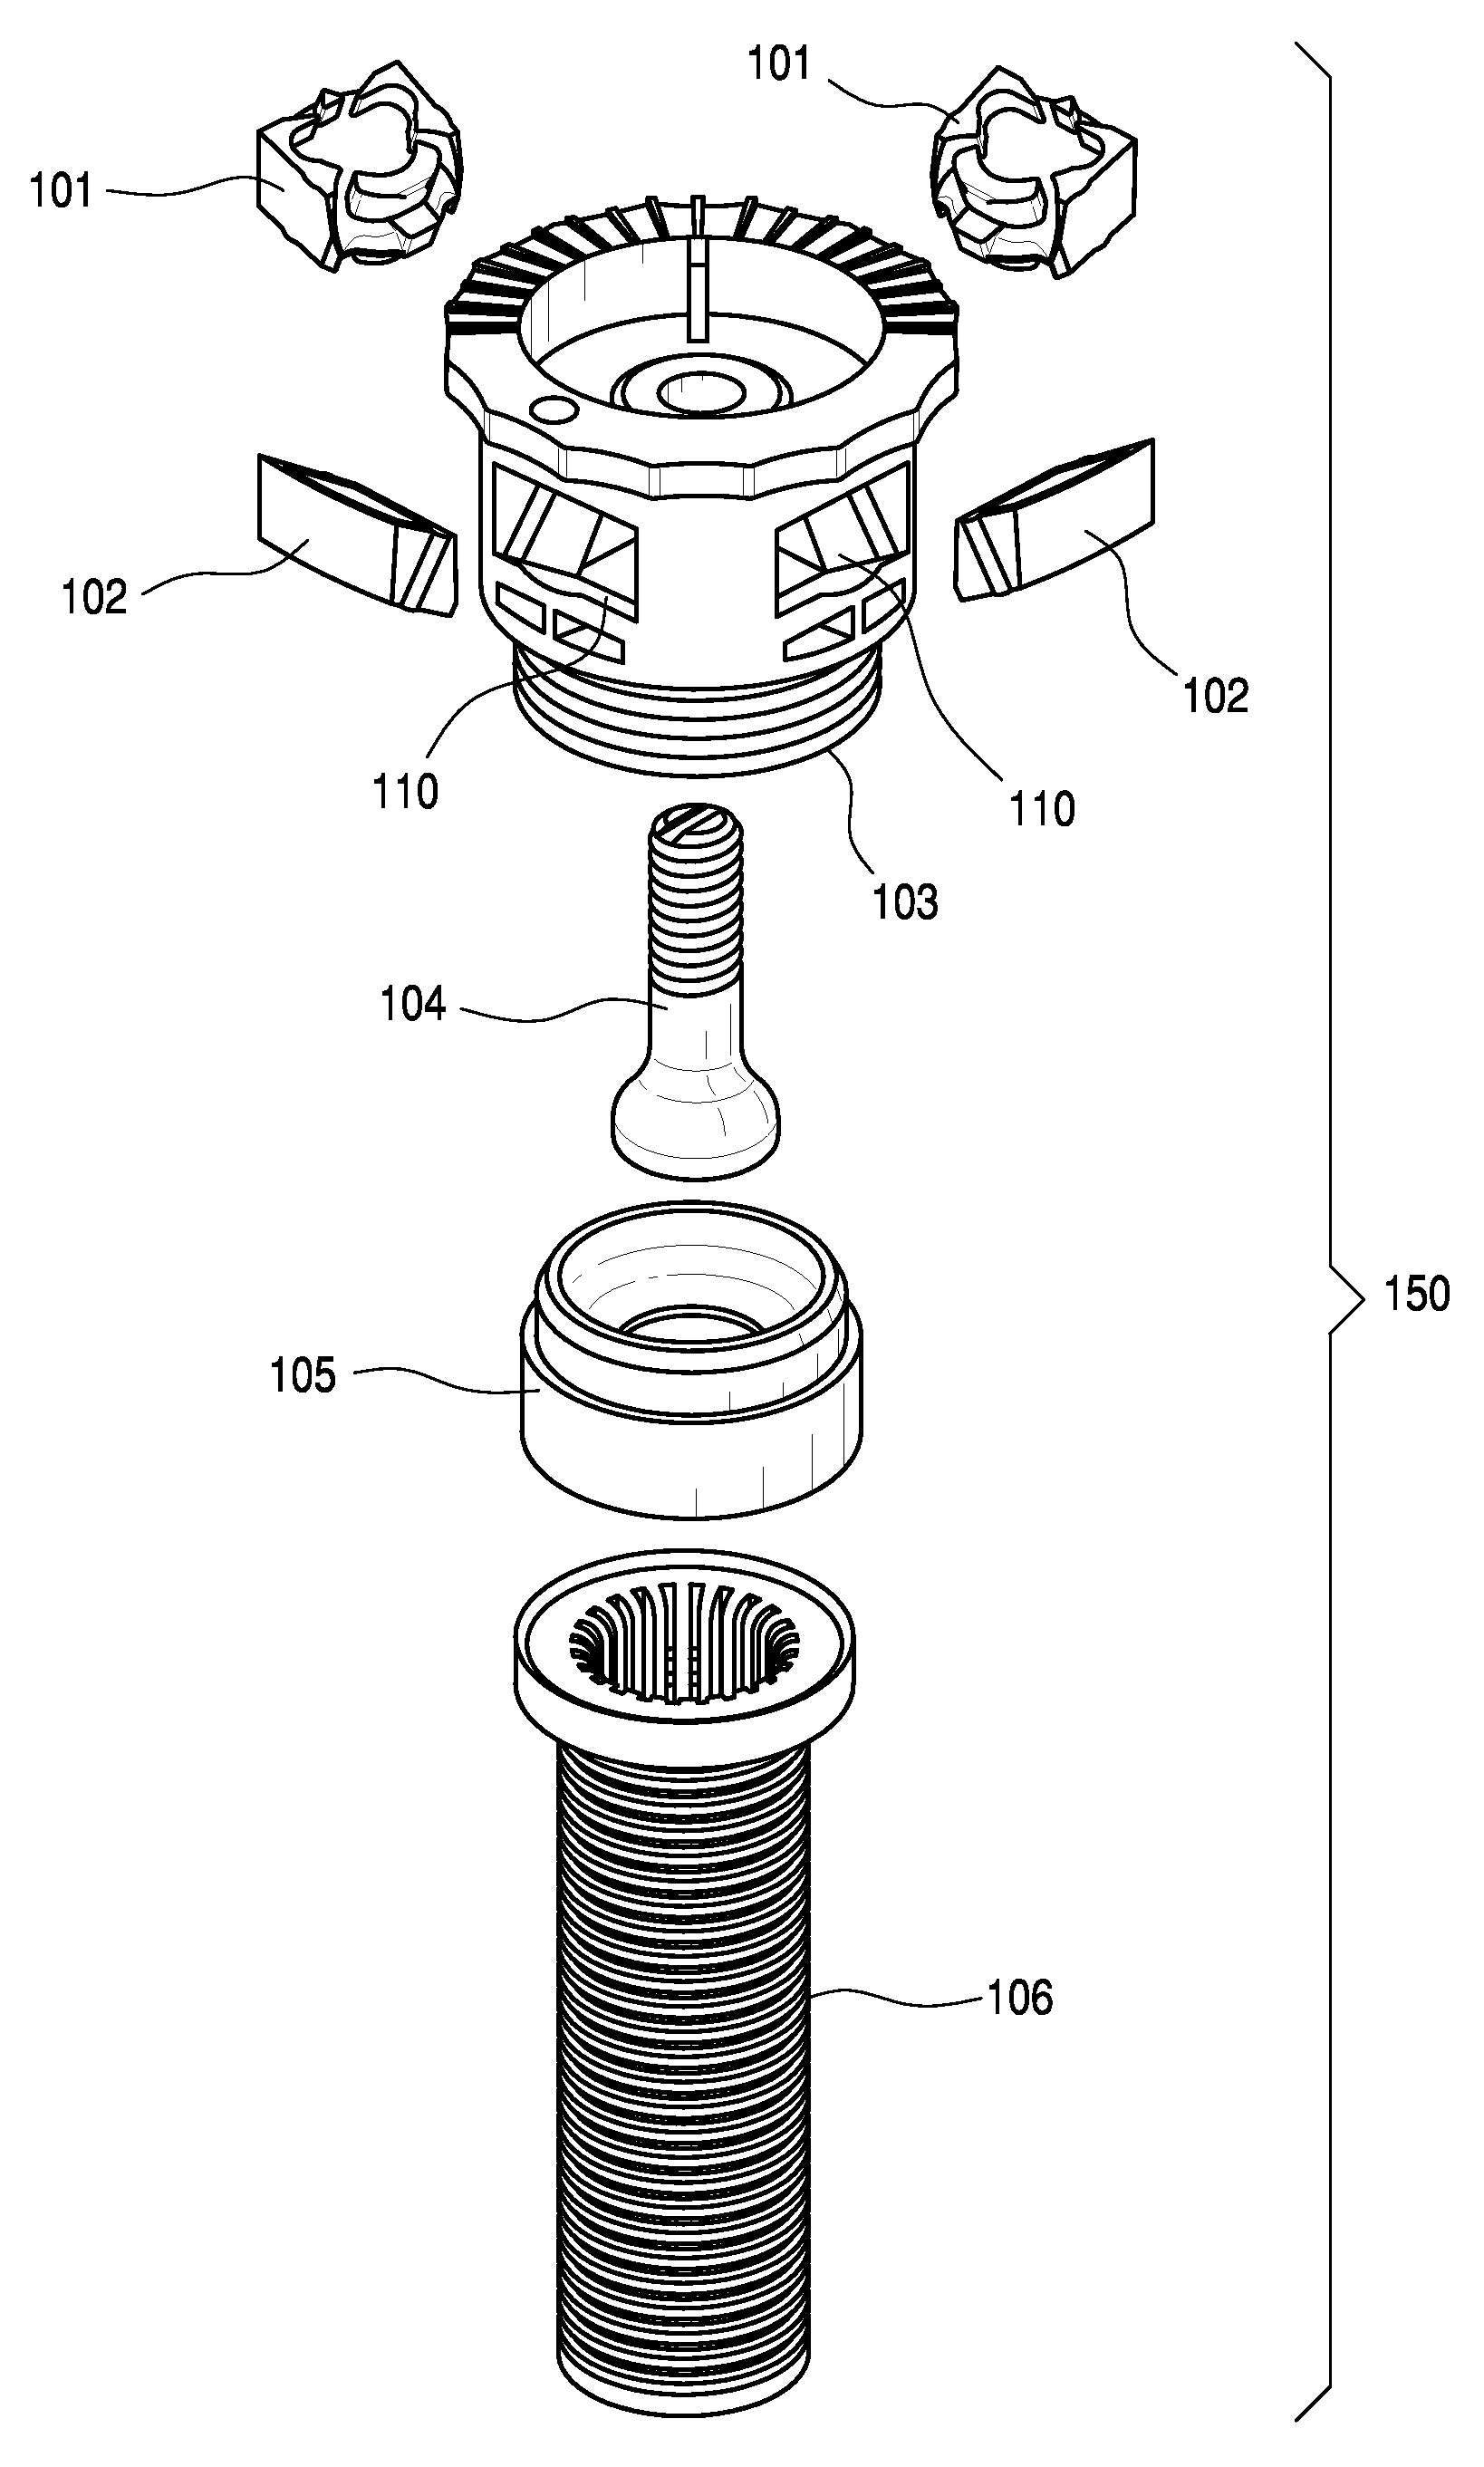 Irrigation nozzle assembly and method